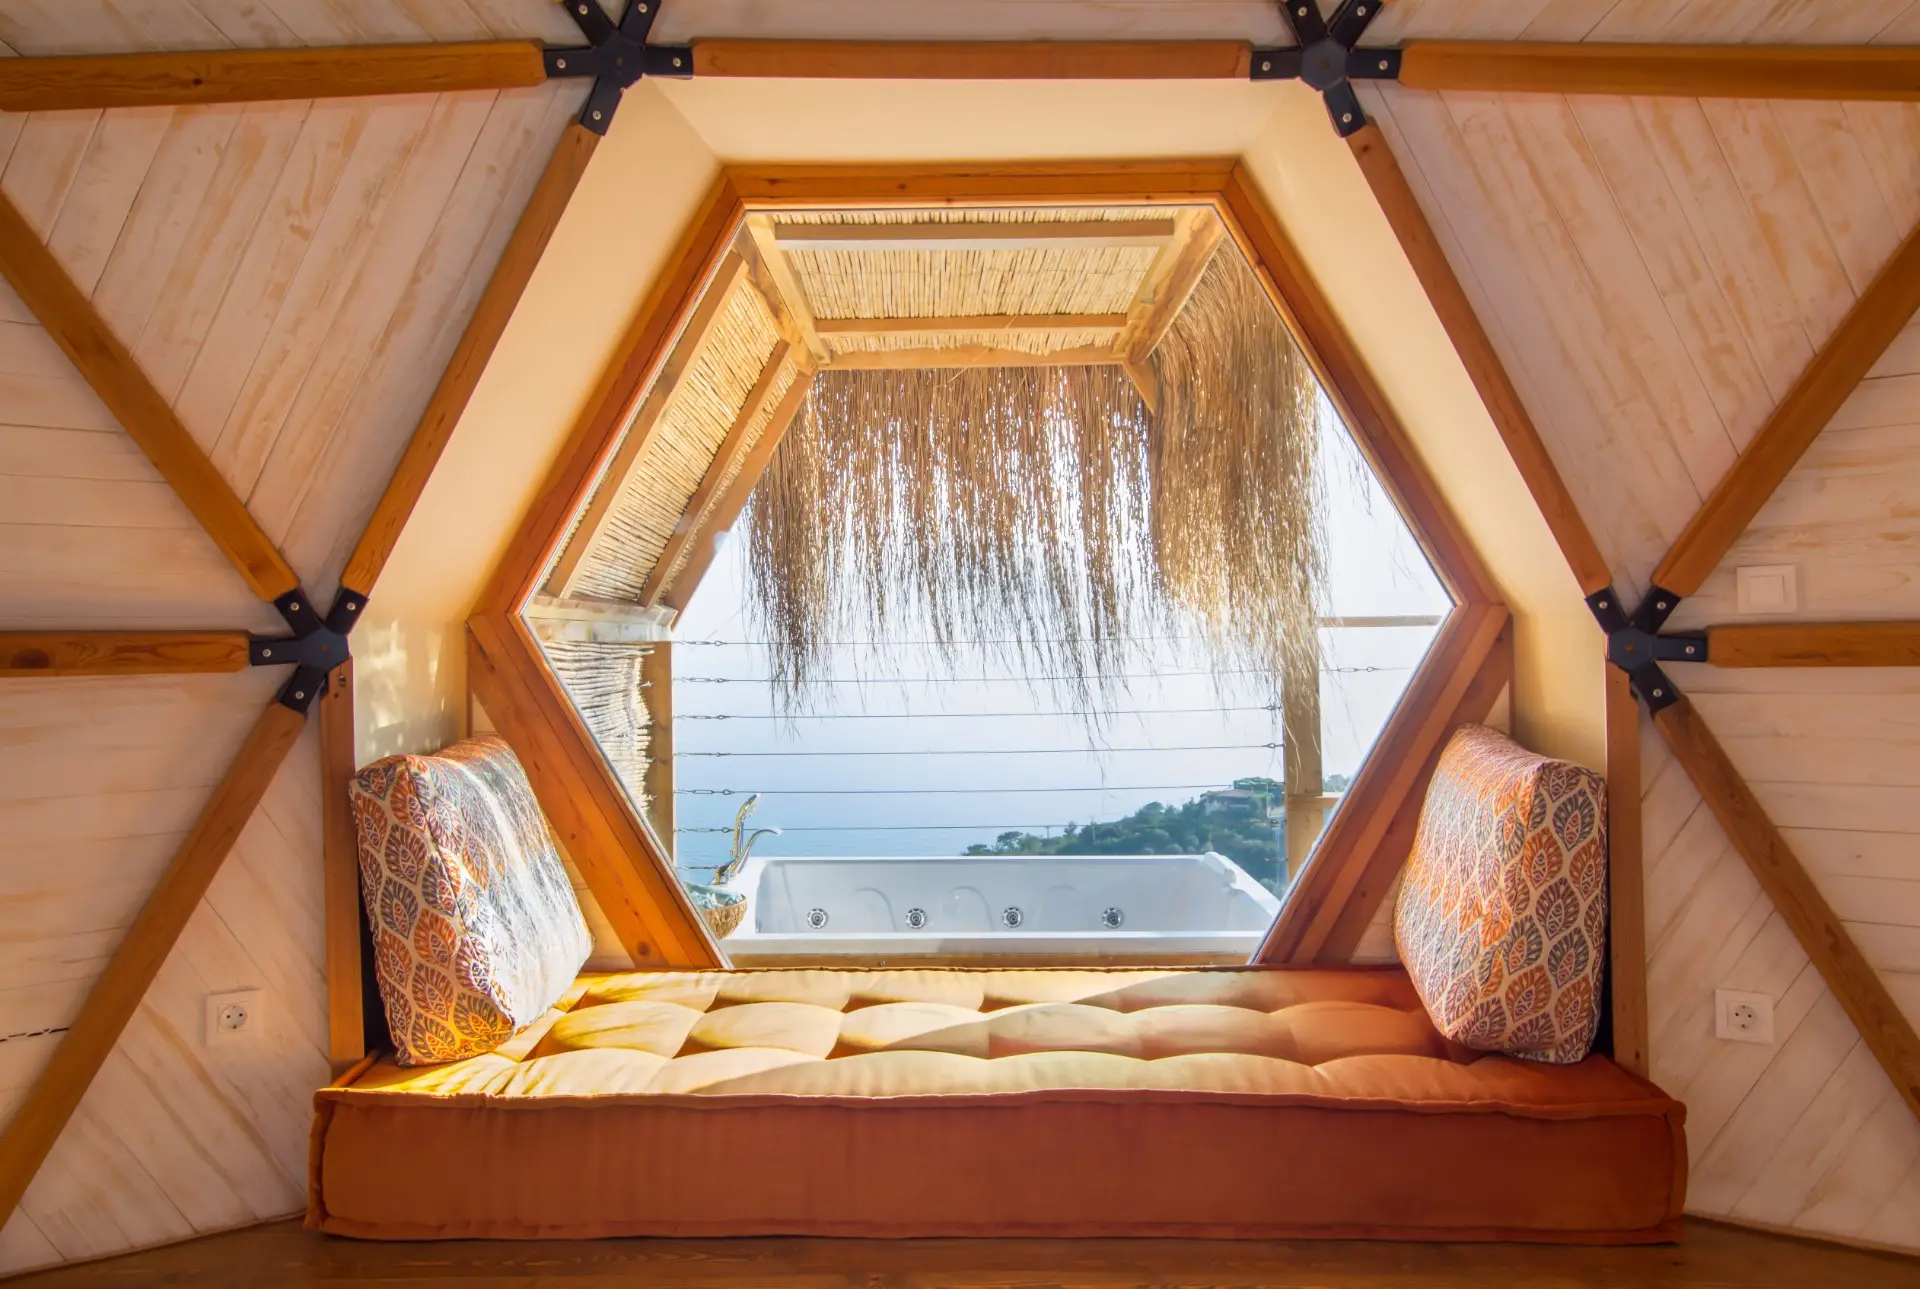 No:5 Dome Sunset Suite